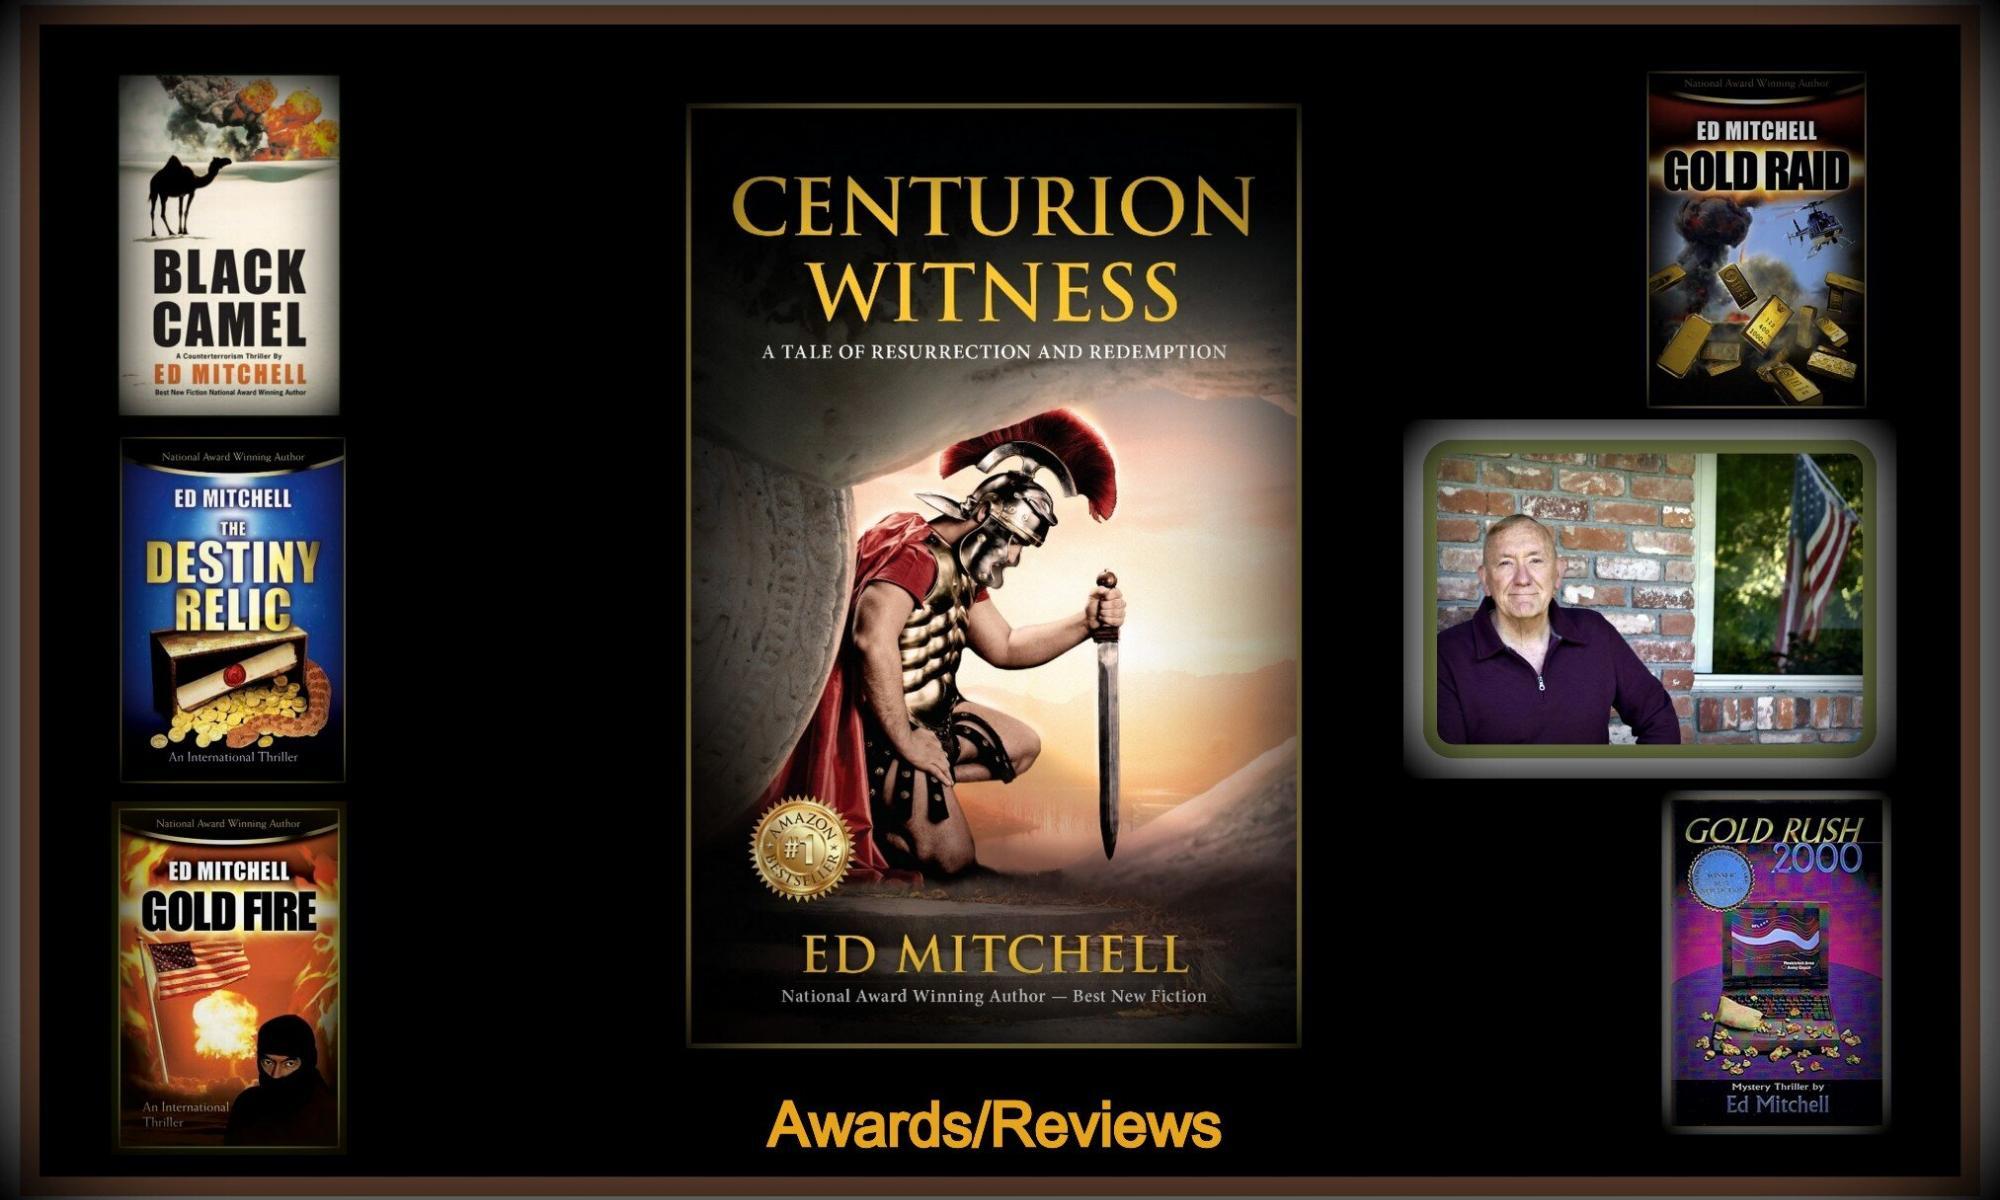 Centurion Witness, the book, by Ed Mitchell shows off all the Awards, Praise and 5 star reviews